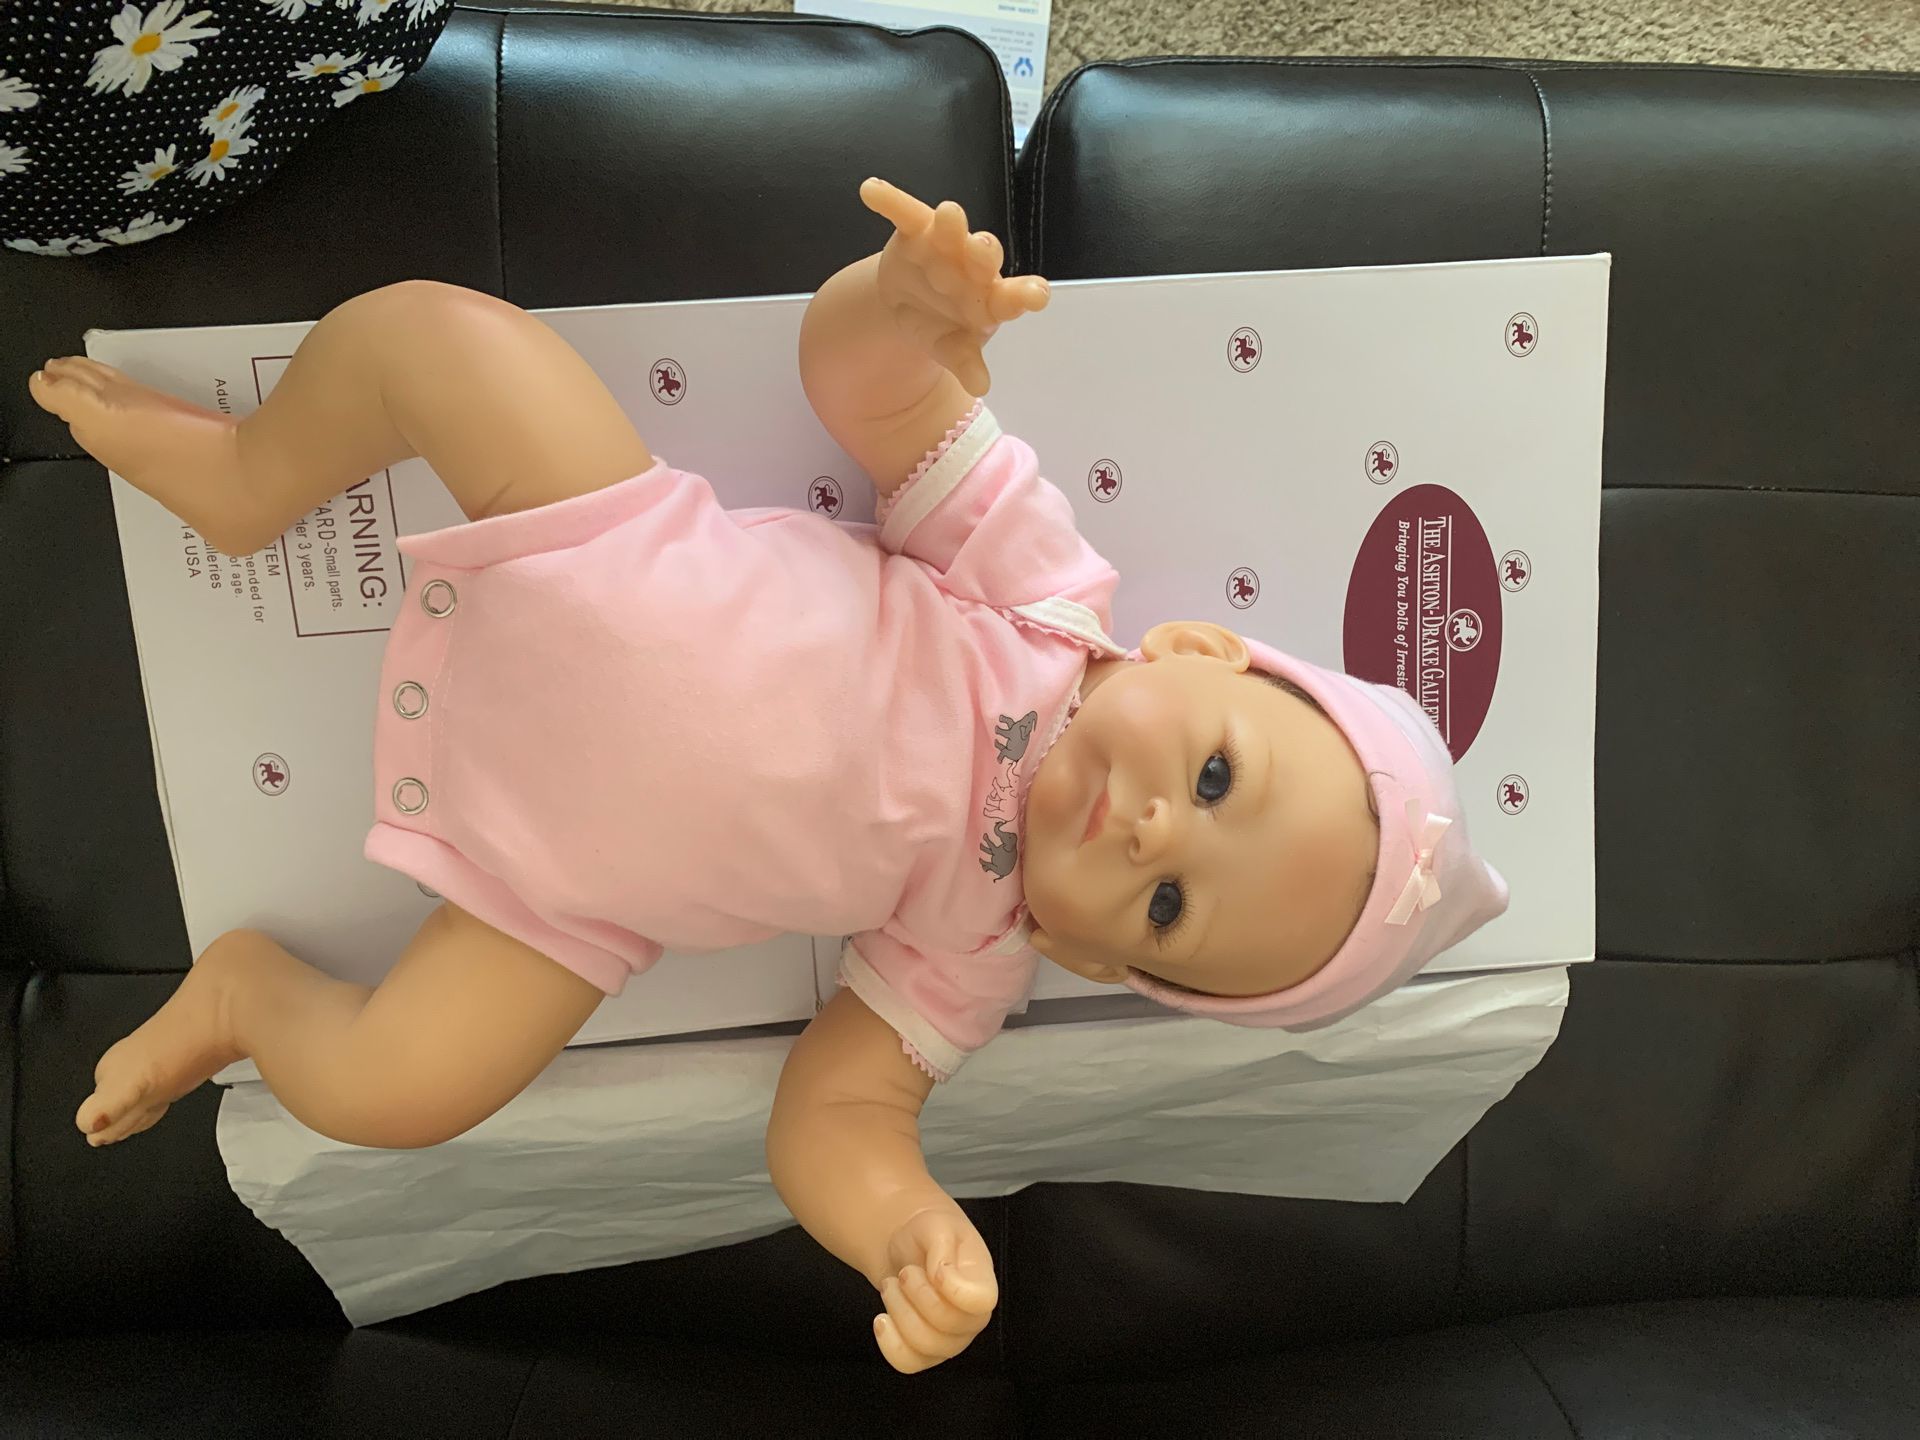 Like real baby doll $30